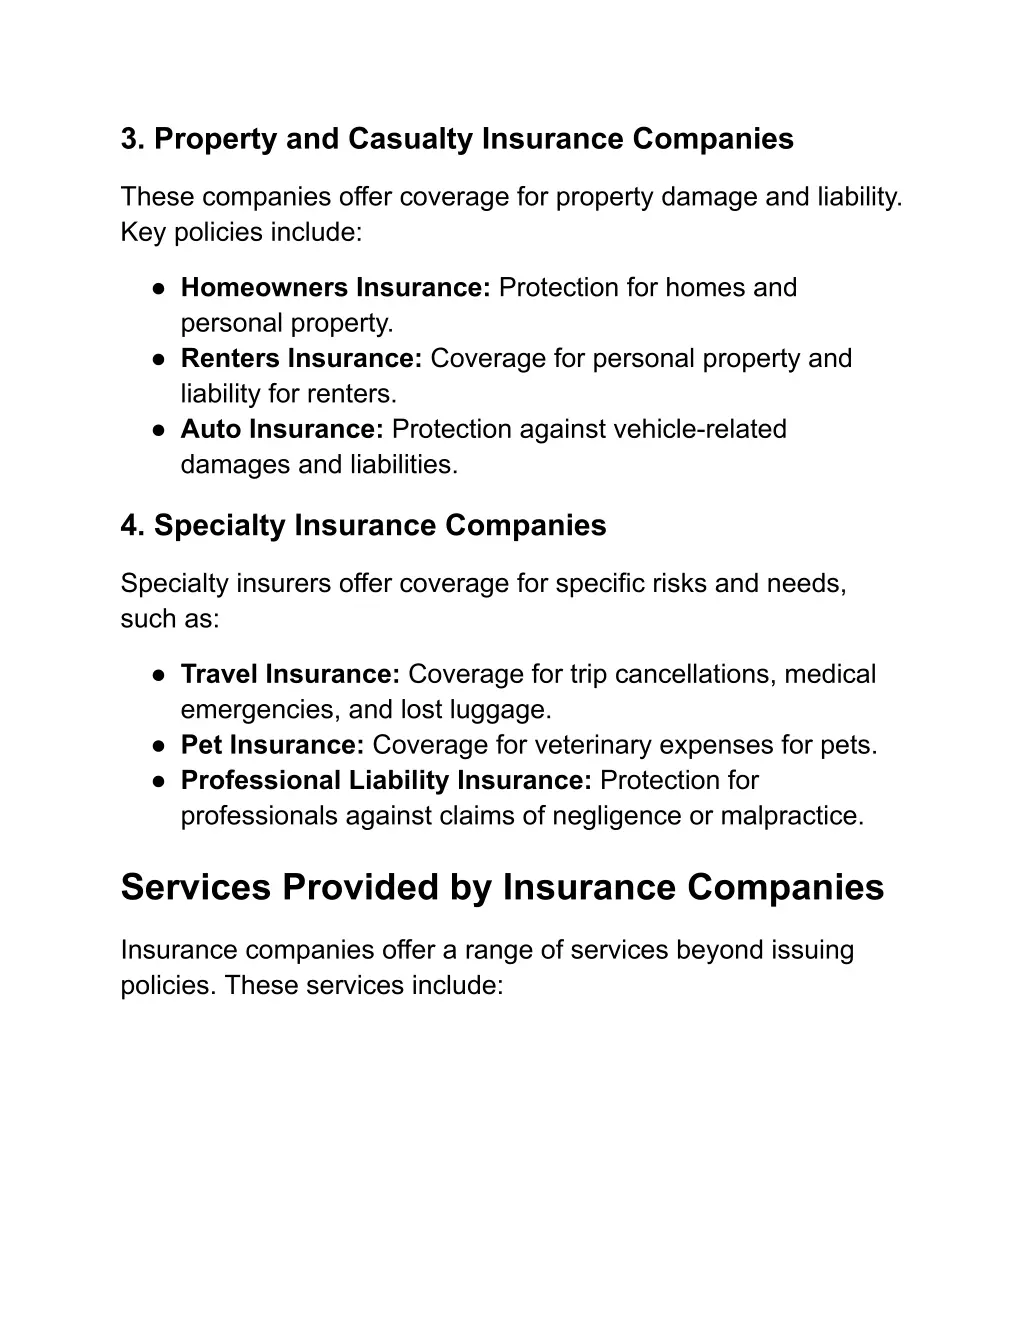 3 property and casualty insurance companies